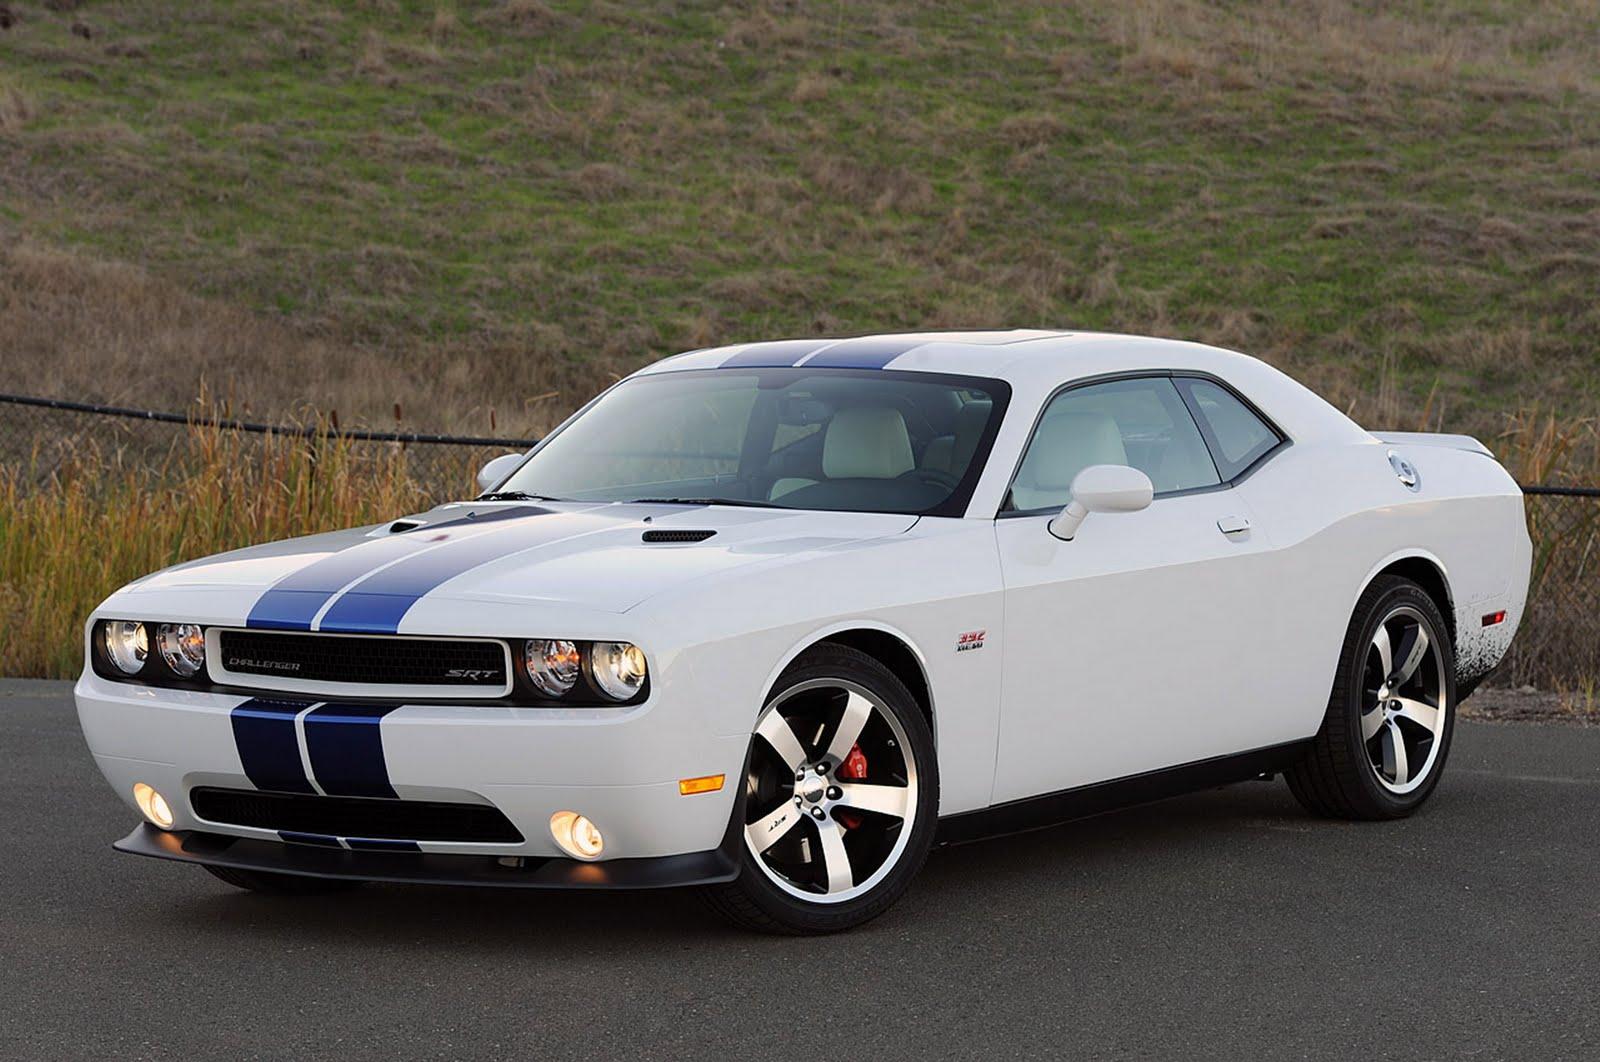 2011 Dodge Challenger SRT8 392 Car Review with Pictures and